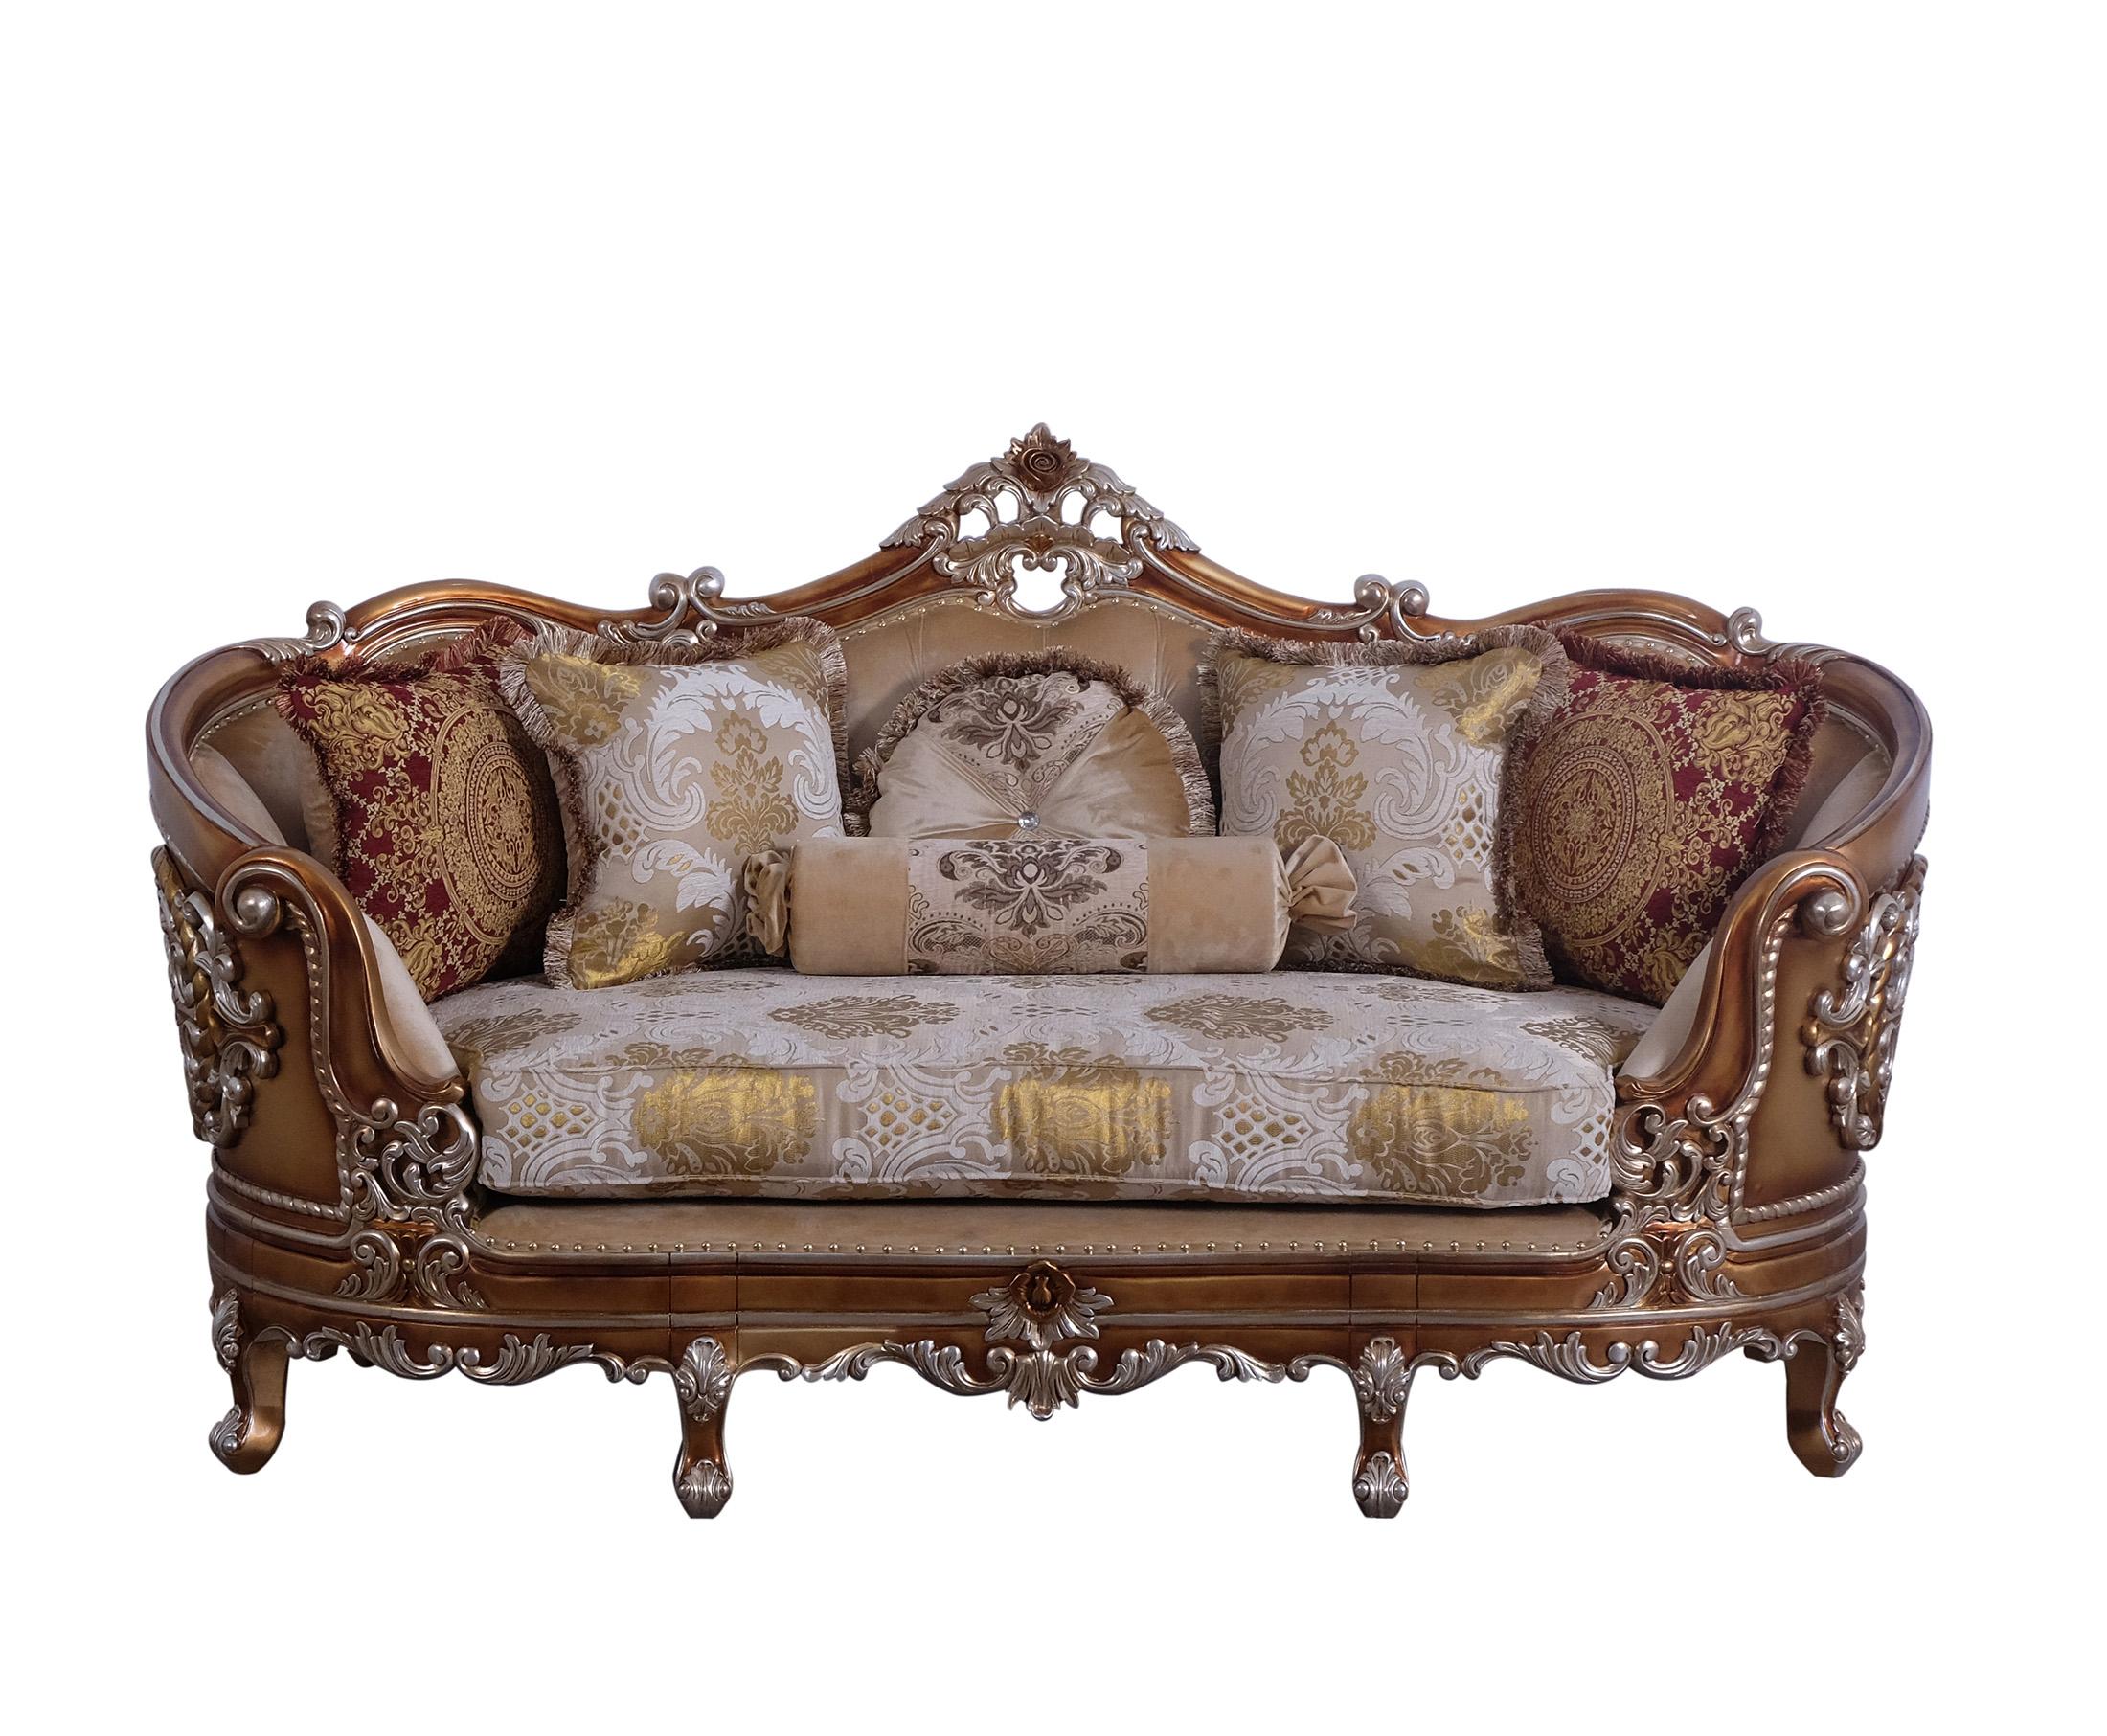 Classic, Traditional Loveseat SAINT GERMAIN 35550-L in Sand, Gold Fabric